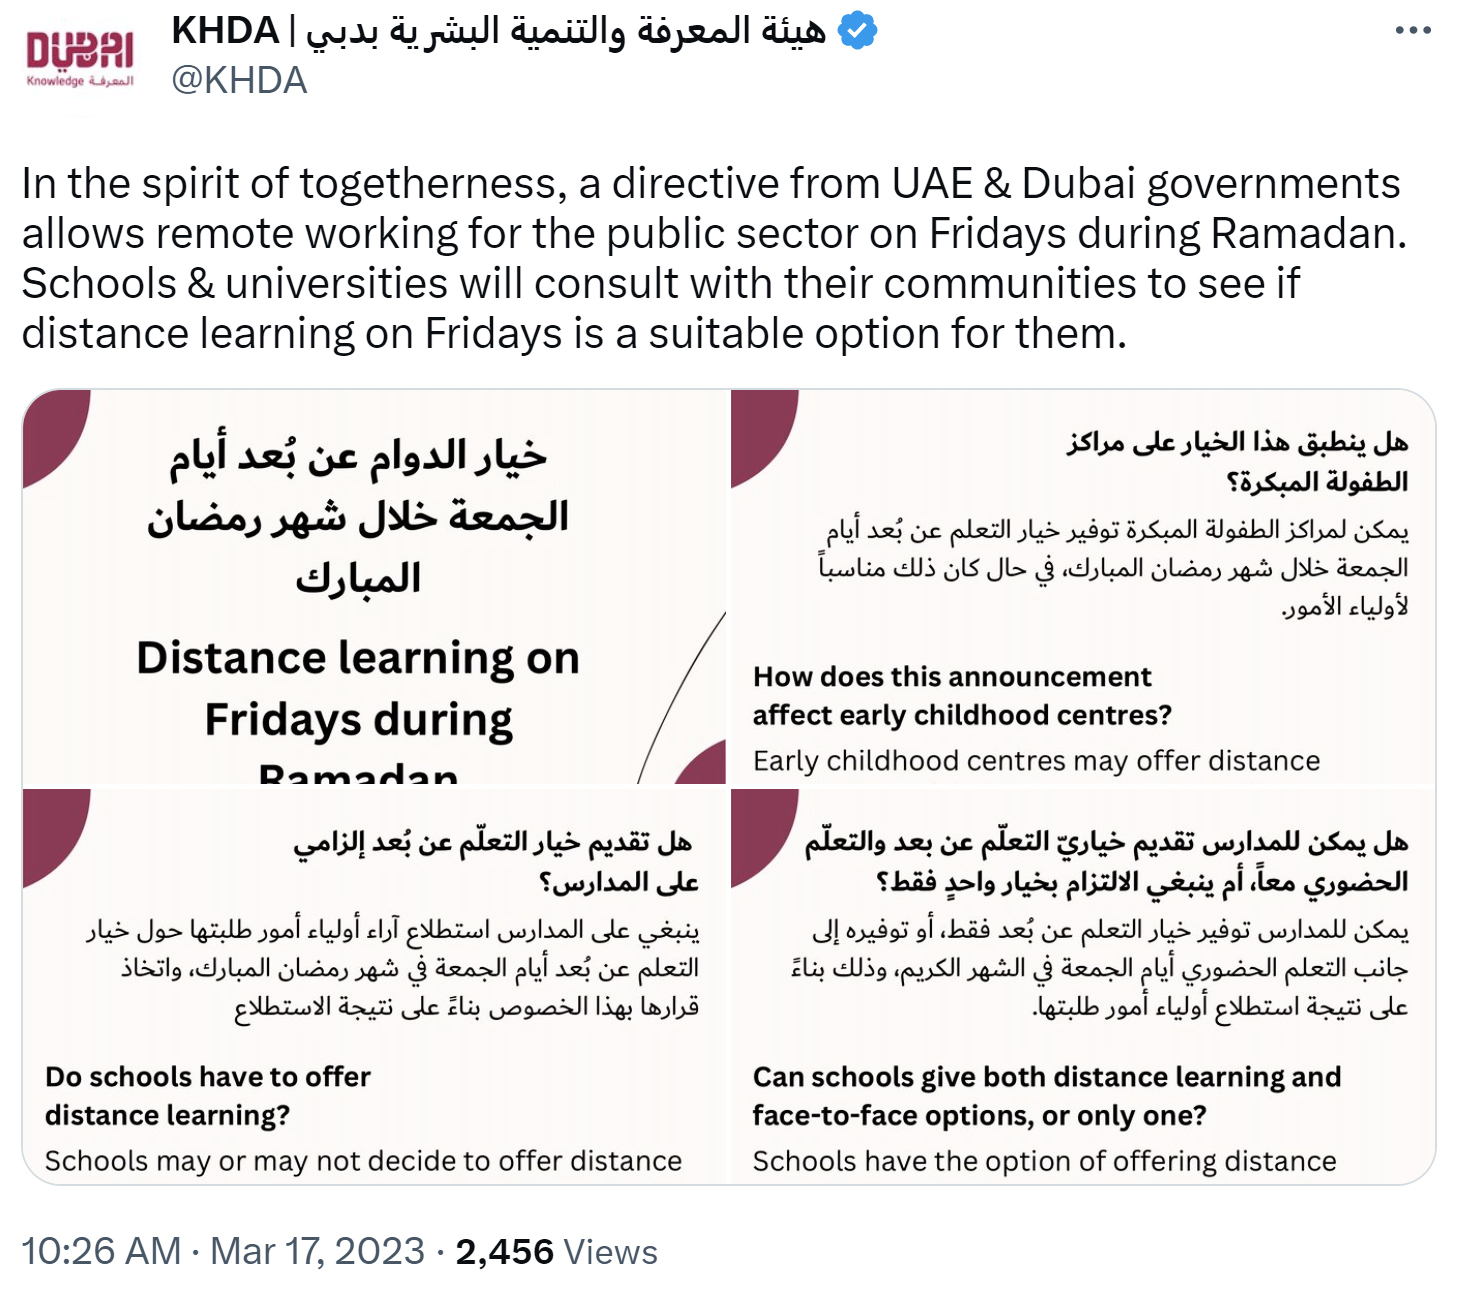 KHDA announce that families must be given the option for students to spend Fridays at home during Ramadan